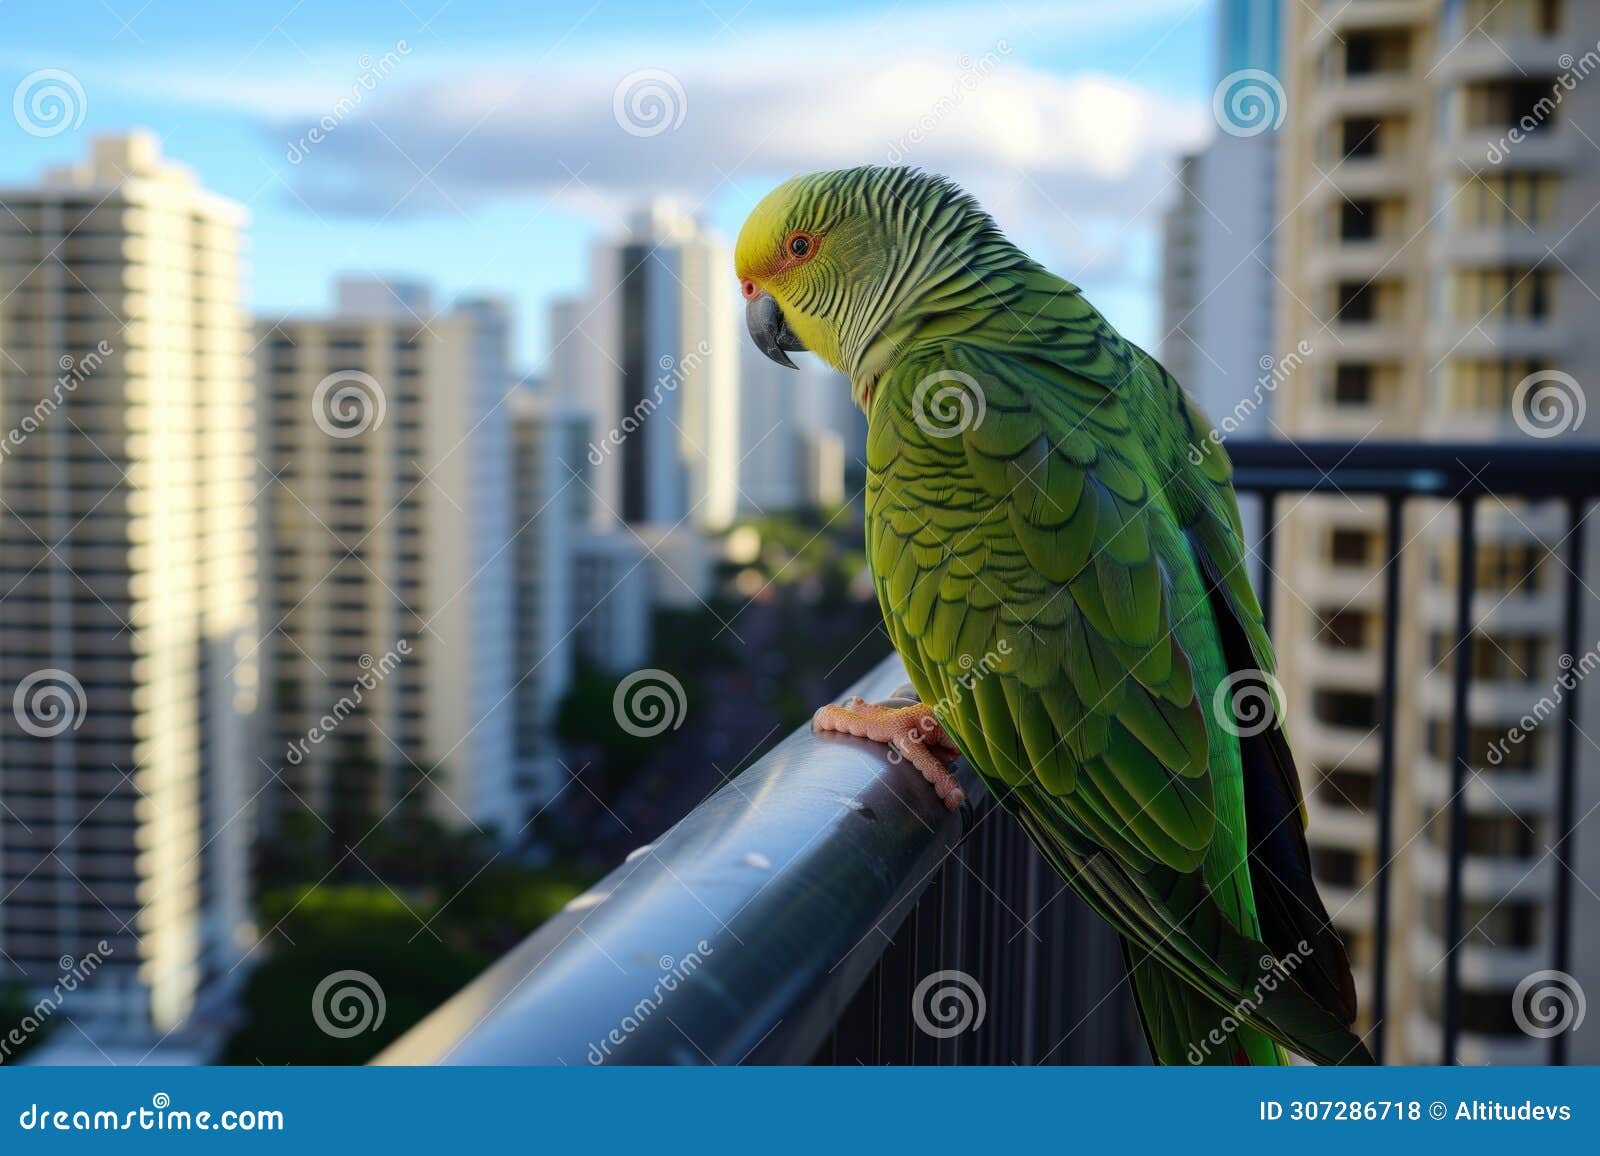 parrot on a balcony railing with highrises in background